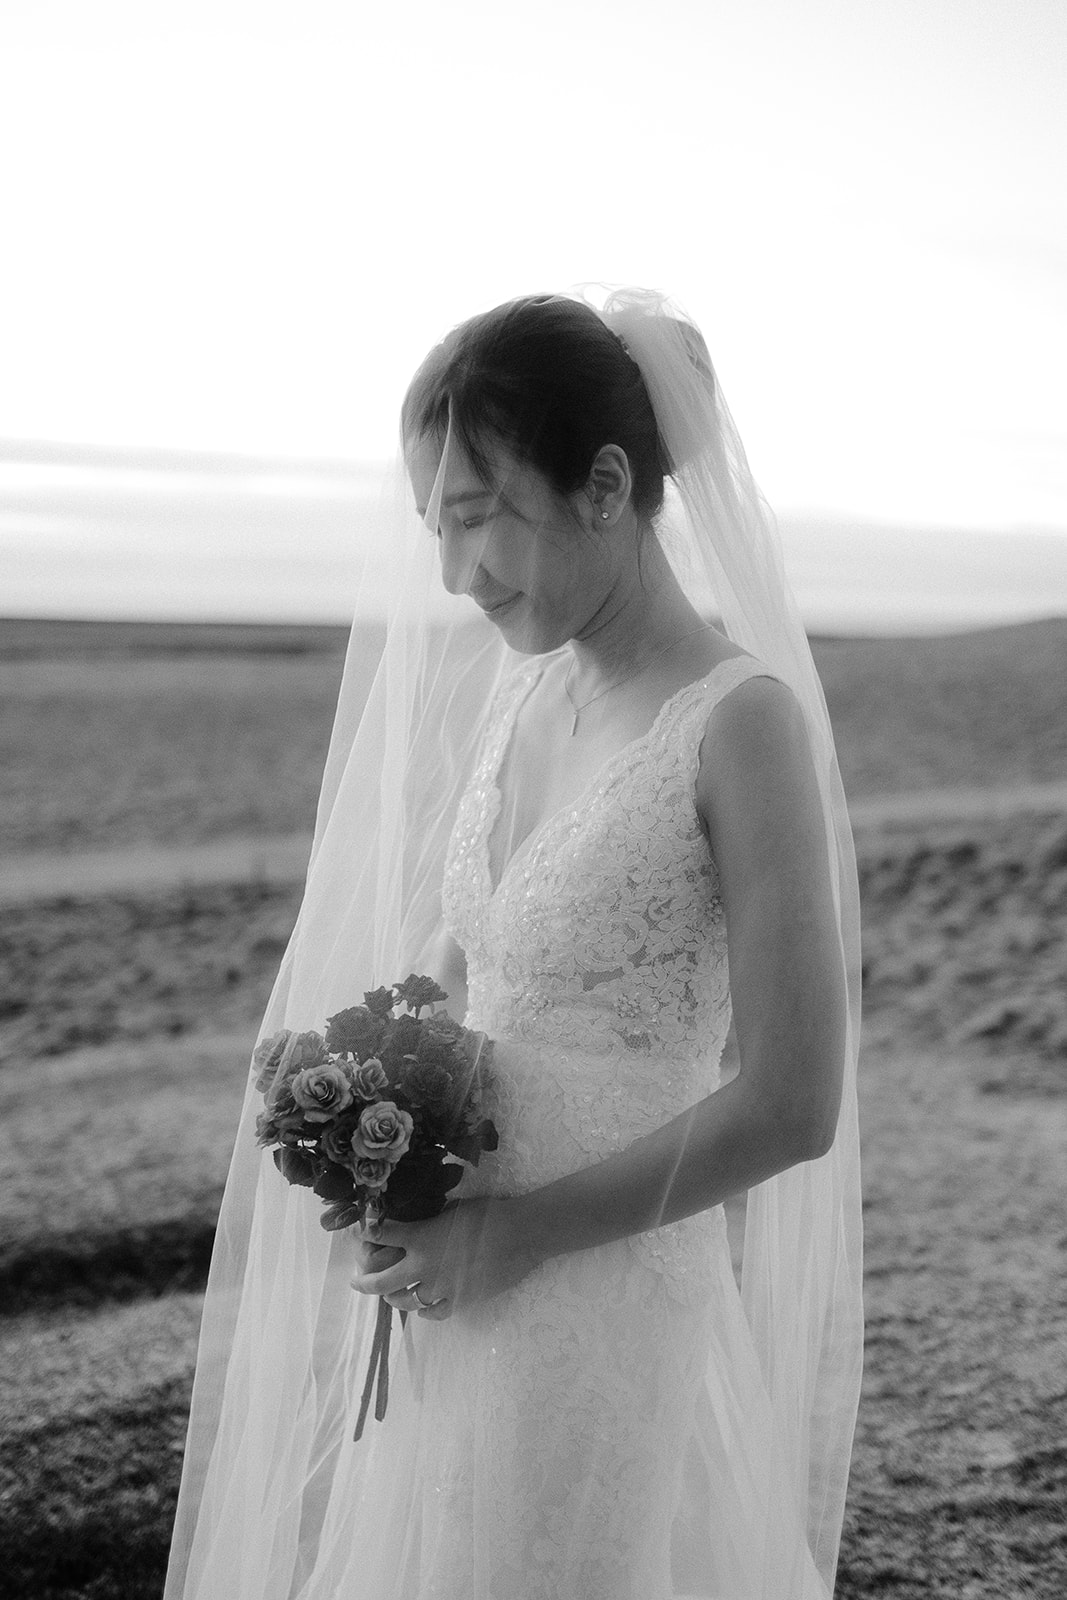 stunning black and white portrait of an Asian bride in Iceland